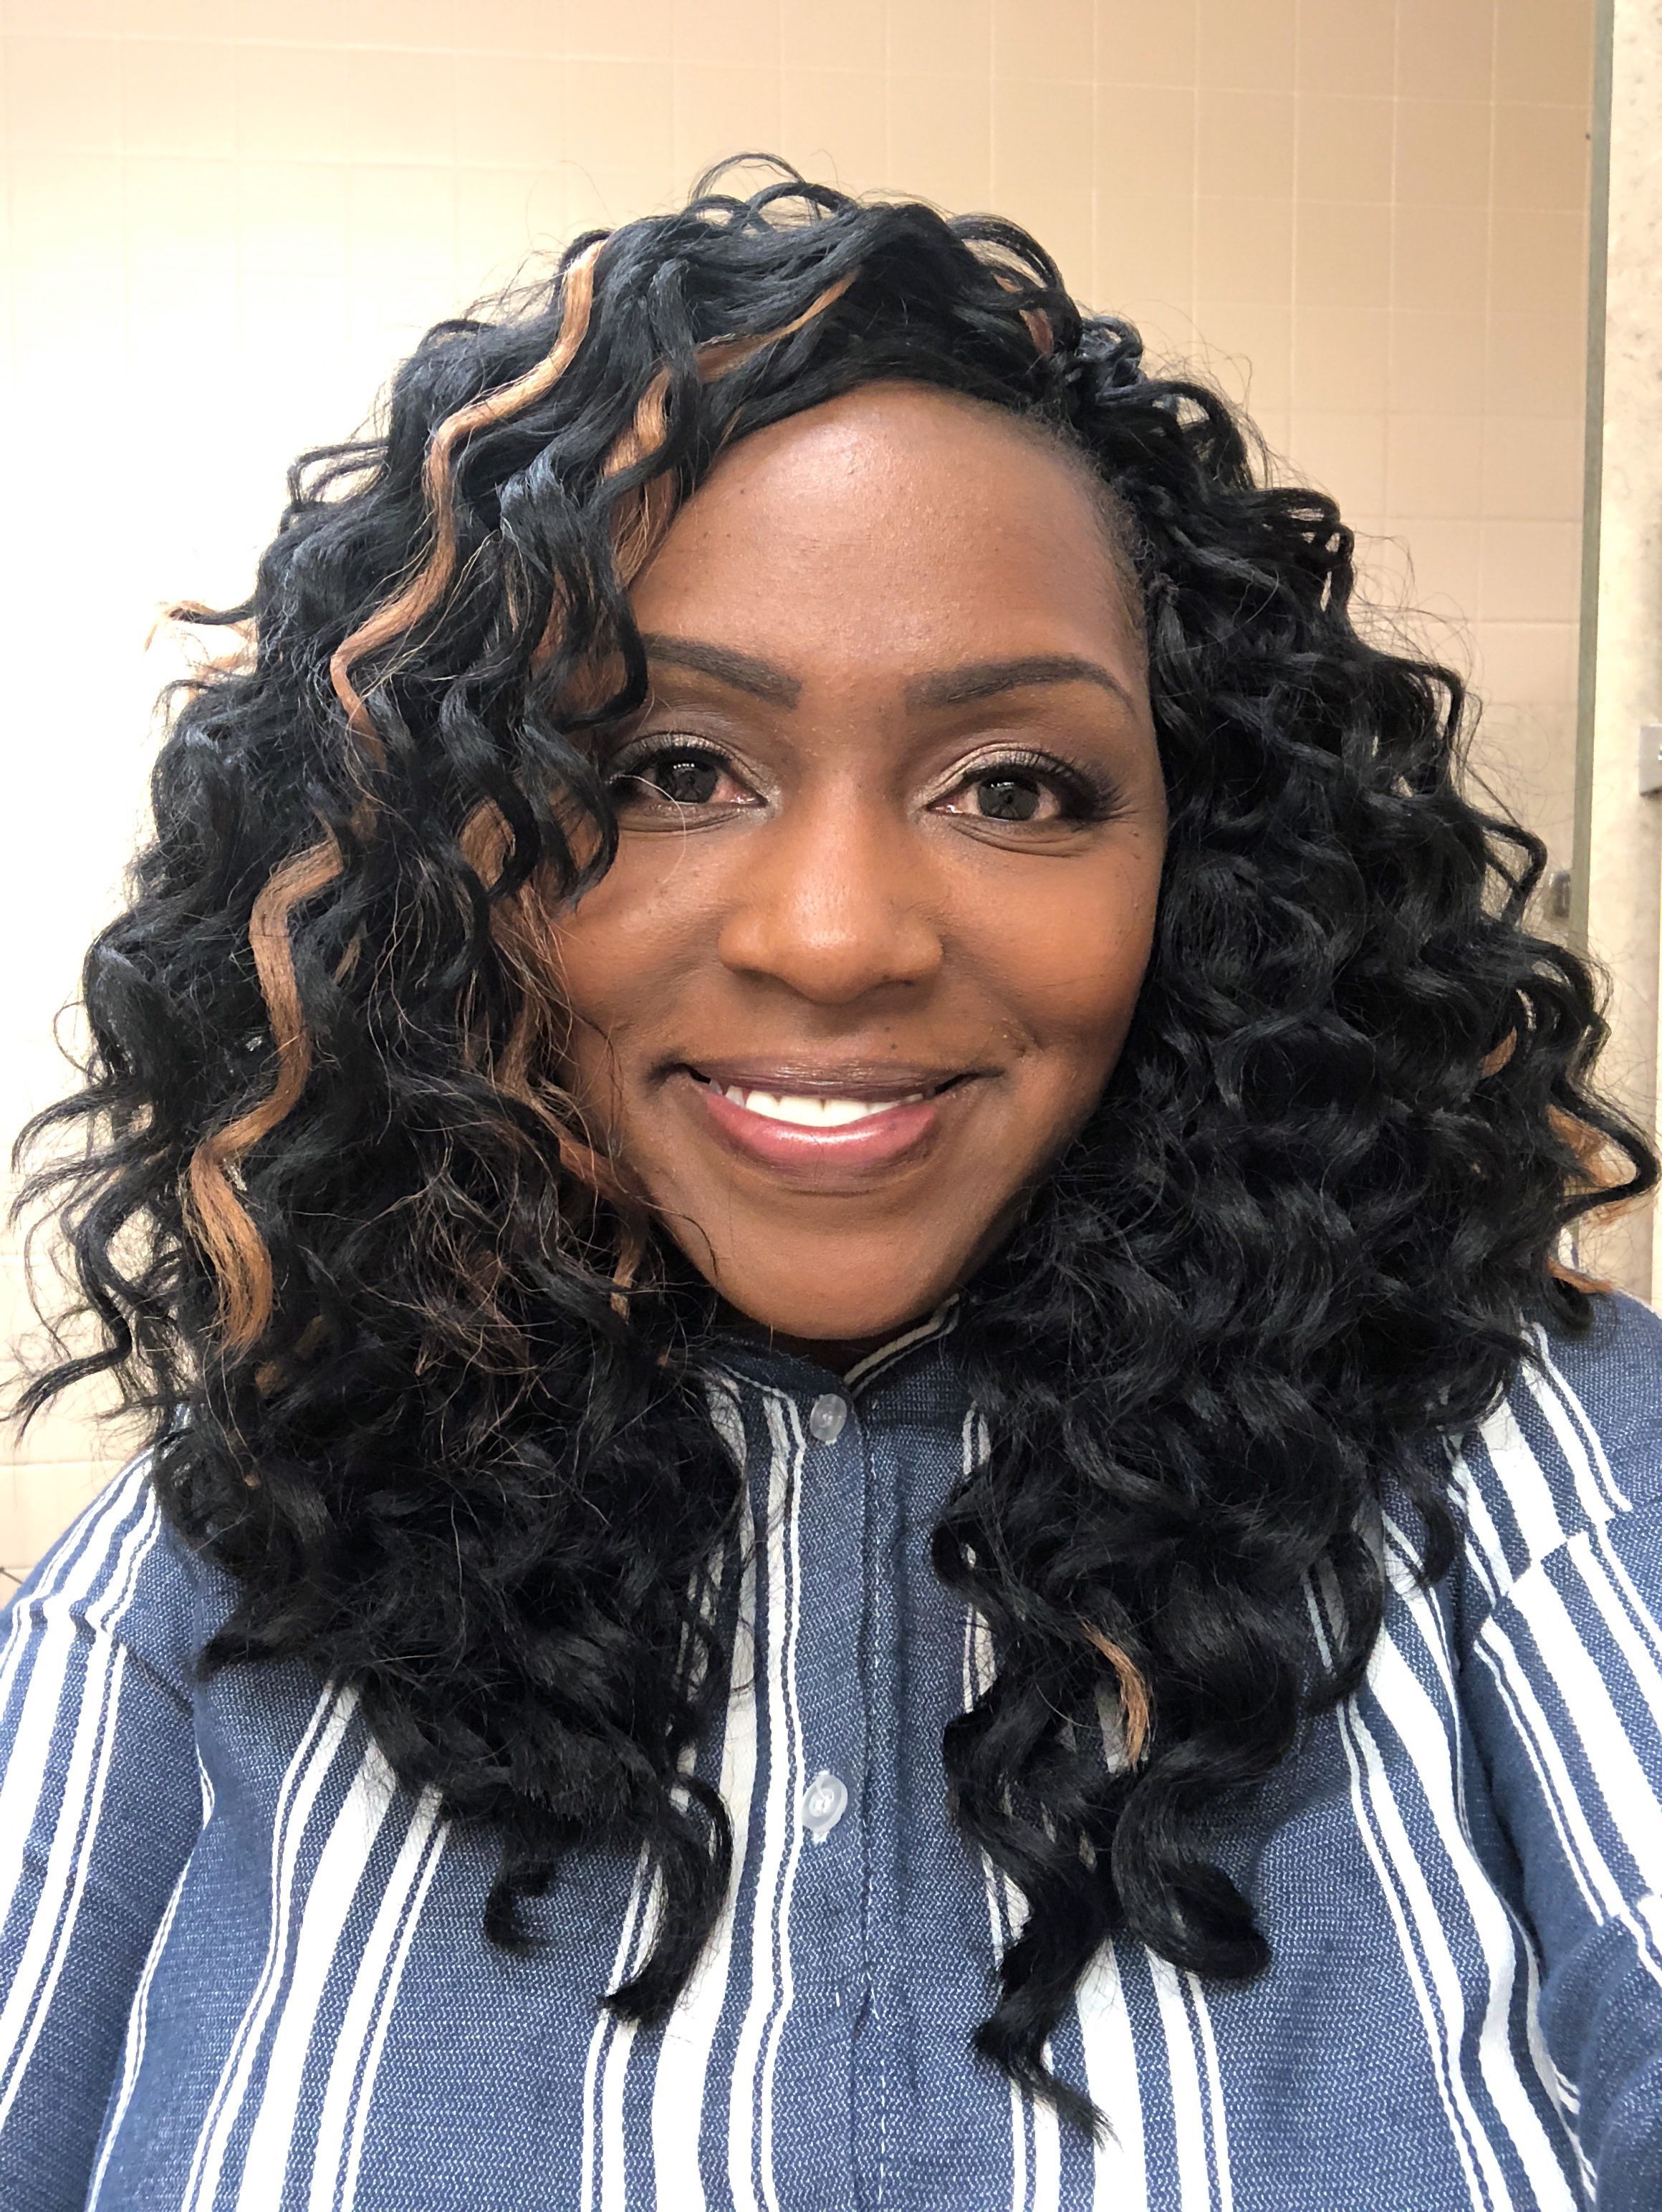 Janet Collection Perm Peruvian Deep Wave Crochet Hair! I Pertaining To Recent Crochet Micro Braid Hairstyles Into Waves (View 11 of 20)